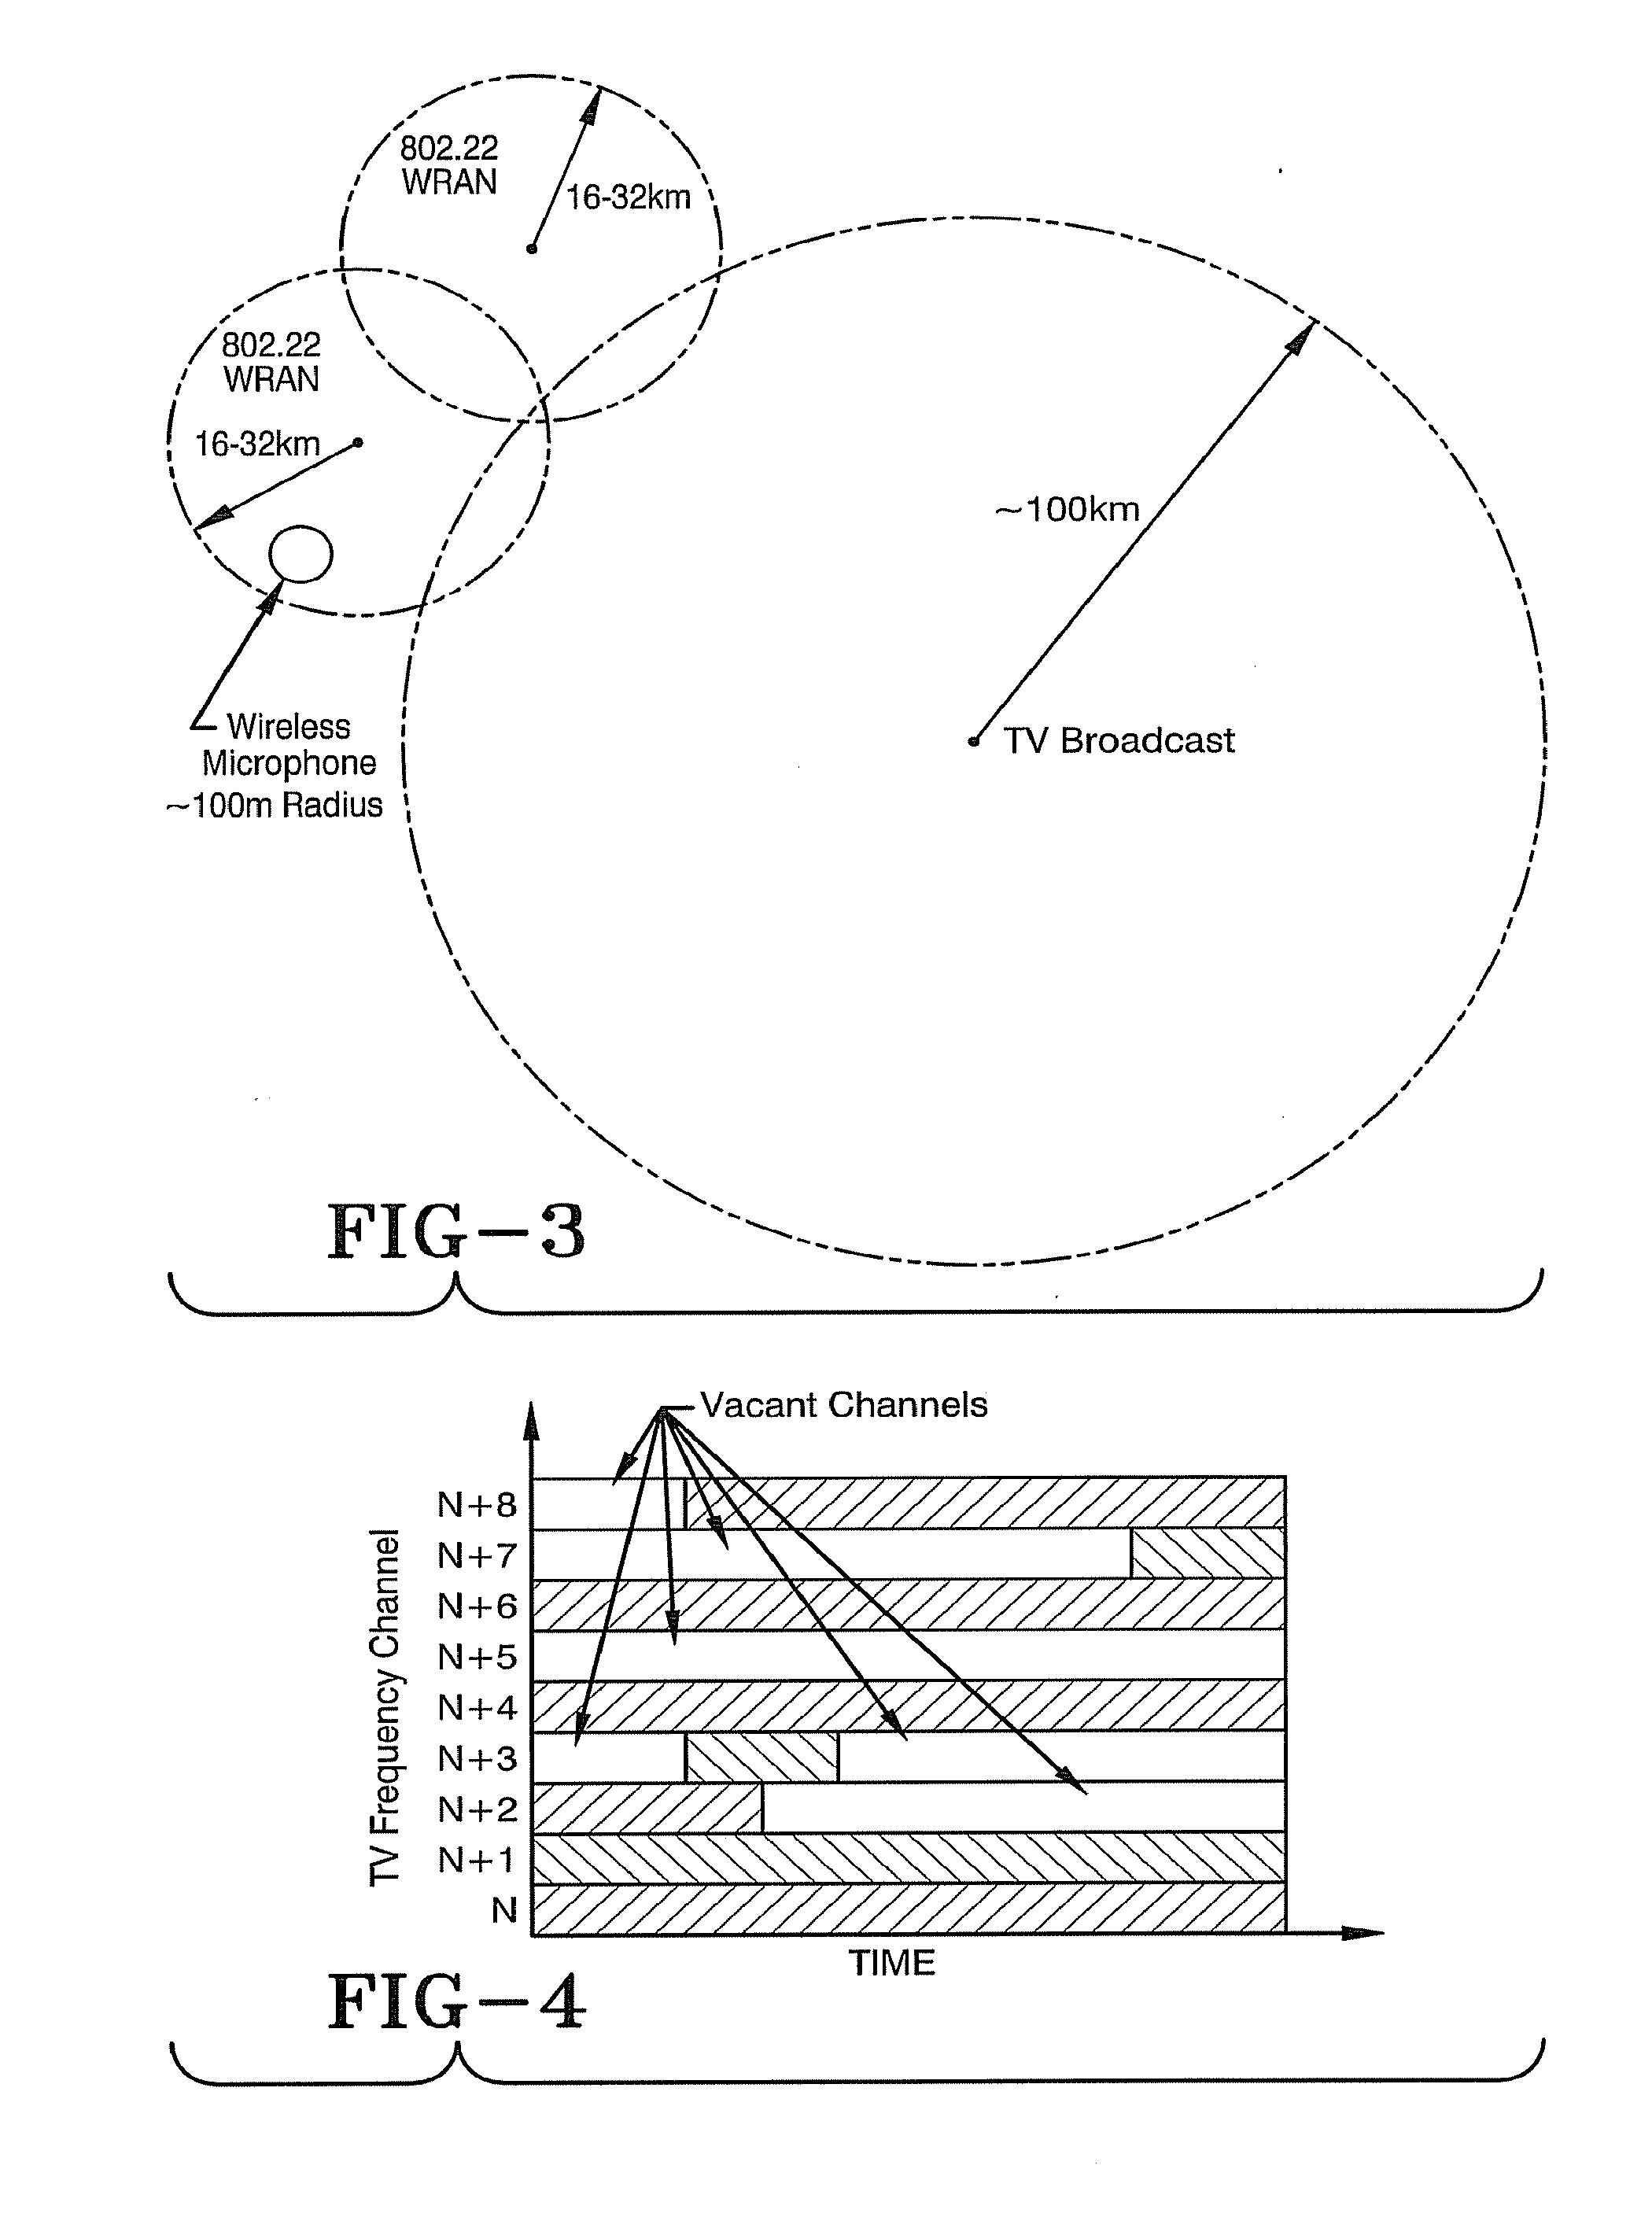 Method and system to make current wireless radios cognitive using an external sensor and application level messaging